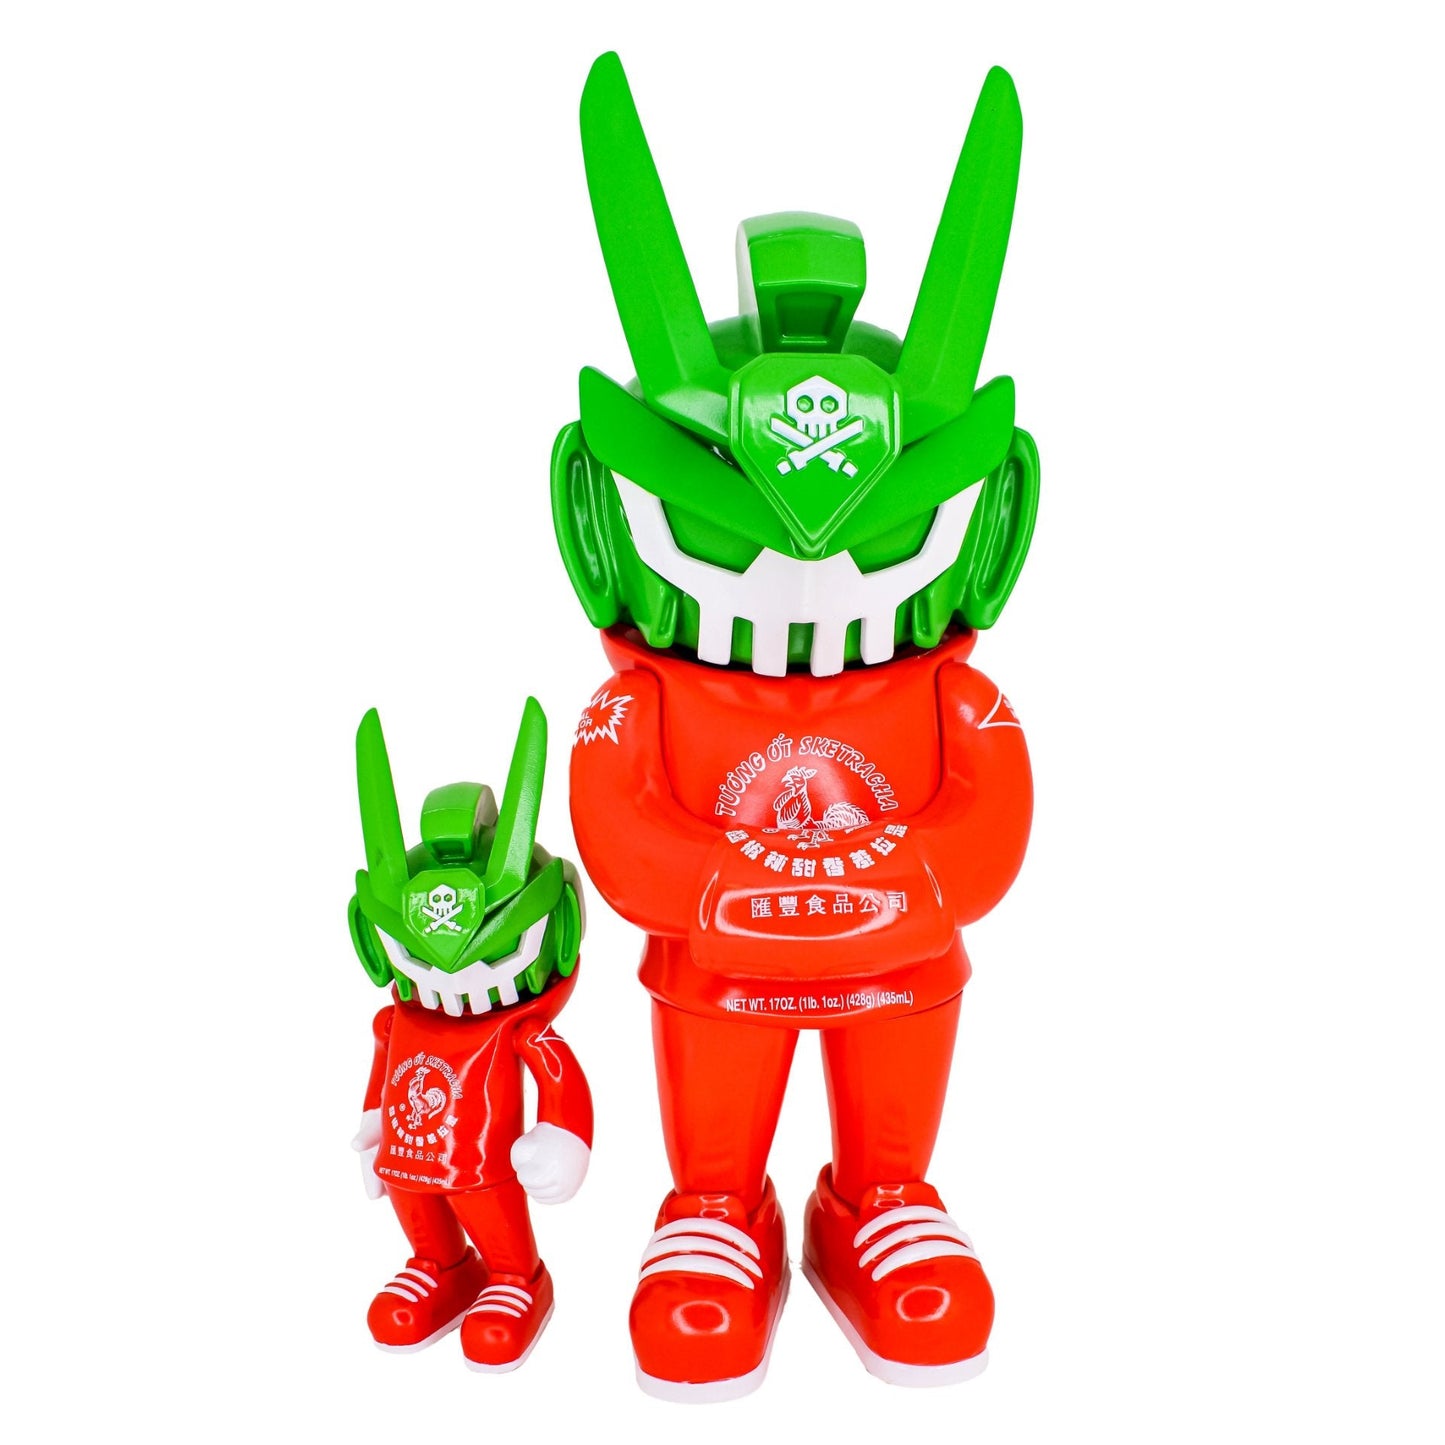 IN STOCK LE399 MARTIAN TOYS MEGATEQ Sketracha 12” Artist Series 2 By SketOne x Quiccs x Martian Toys